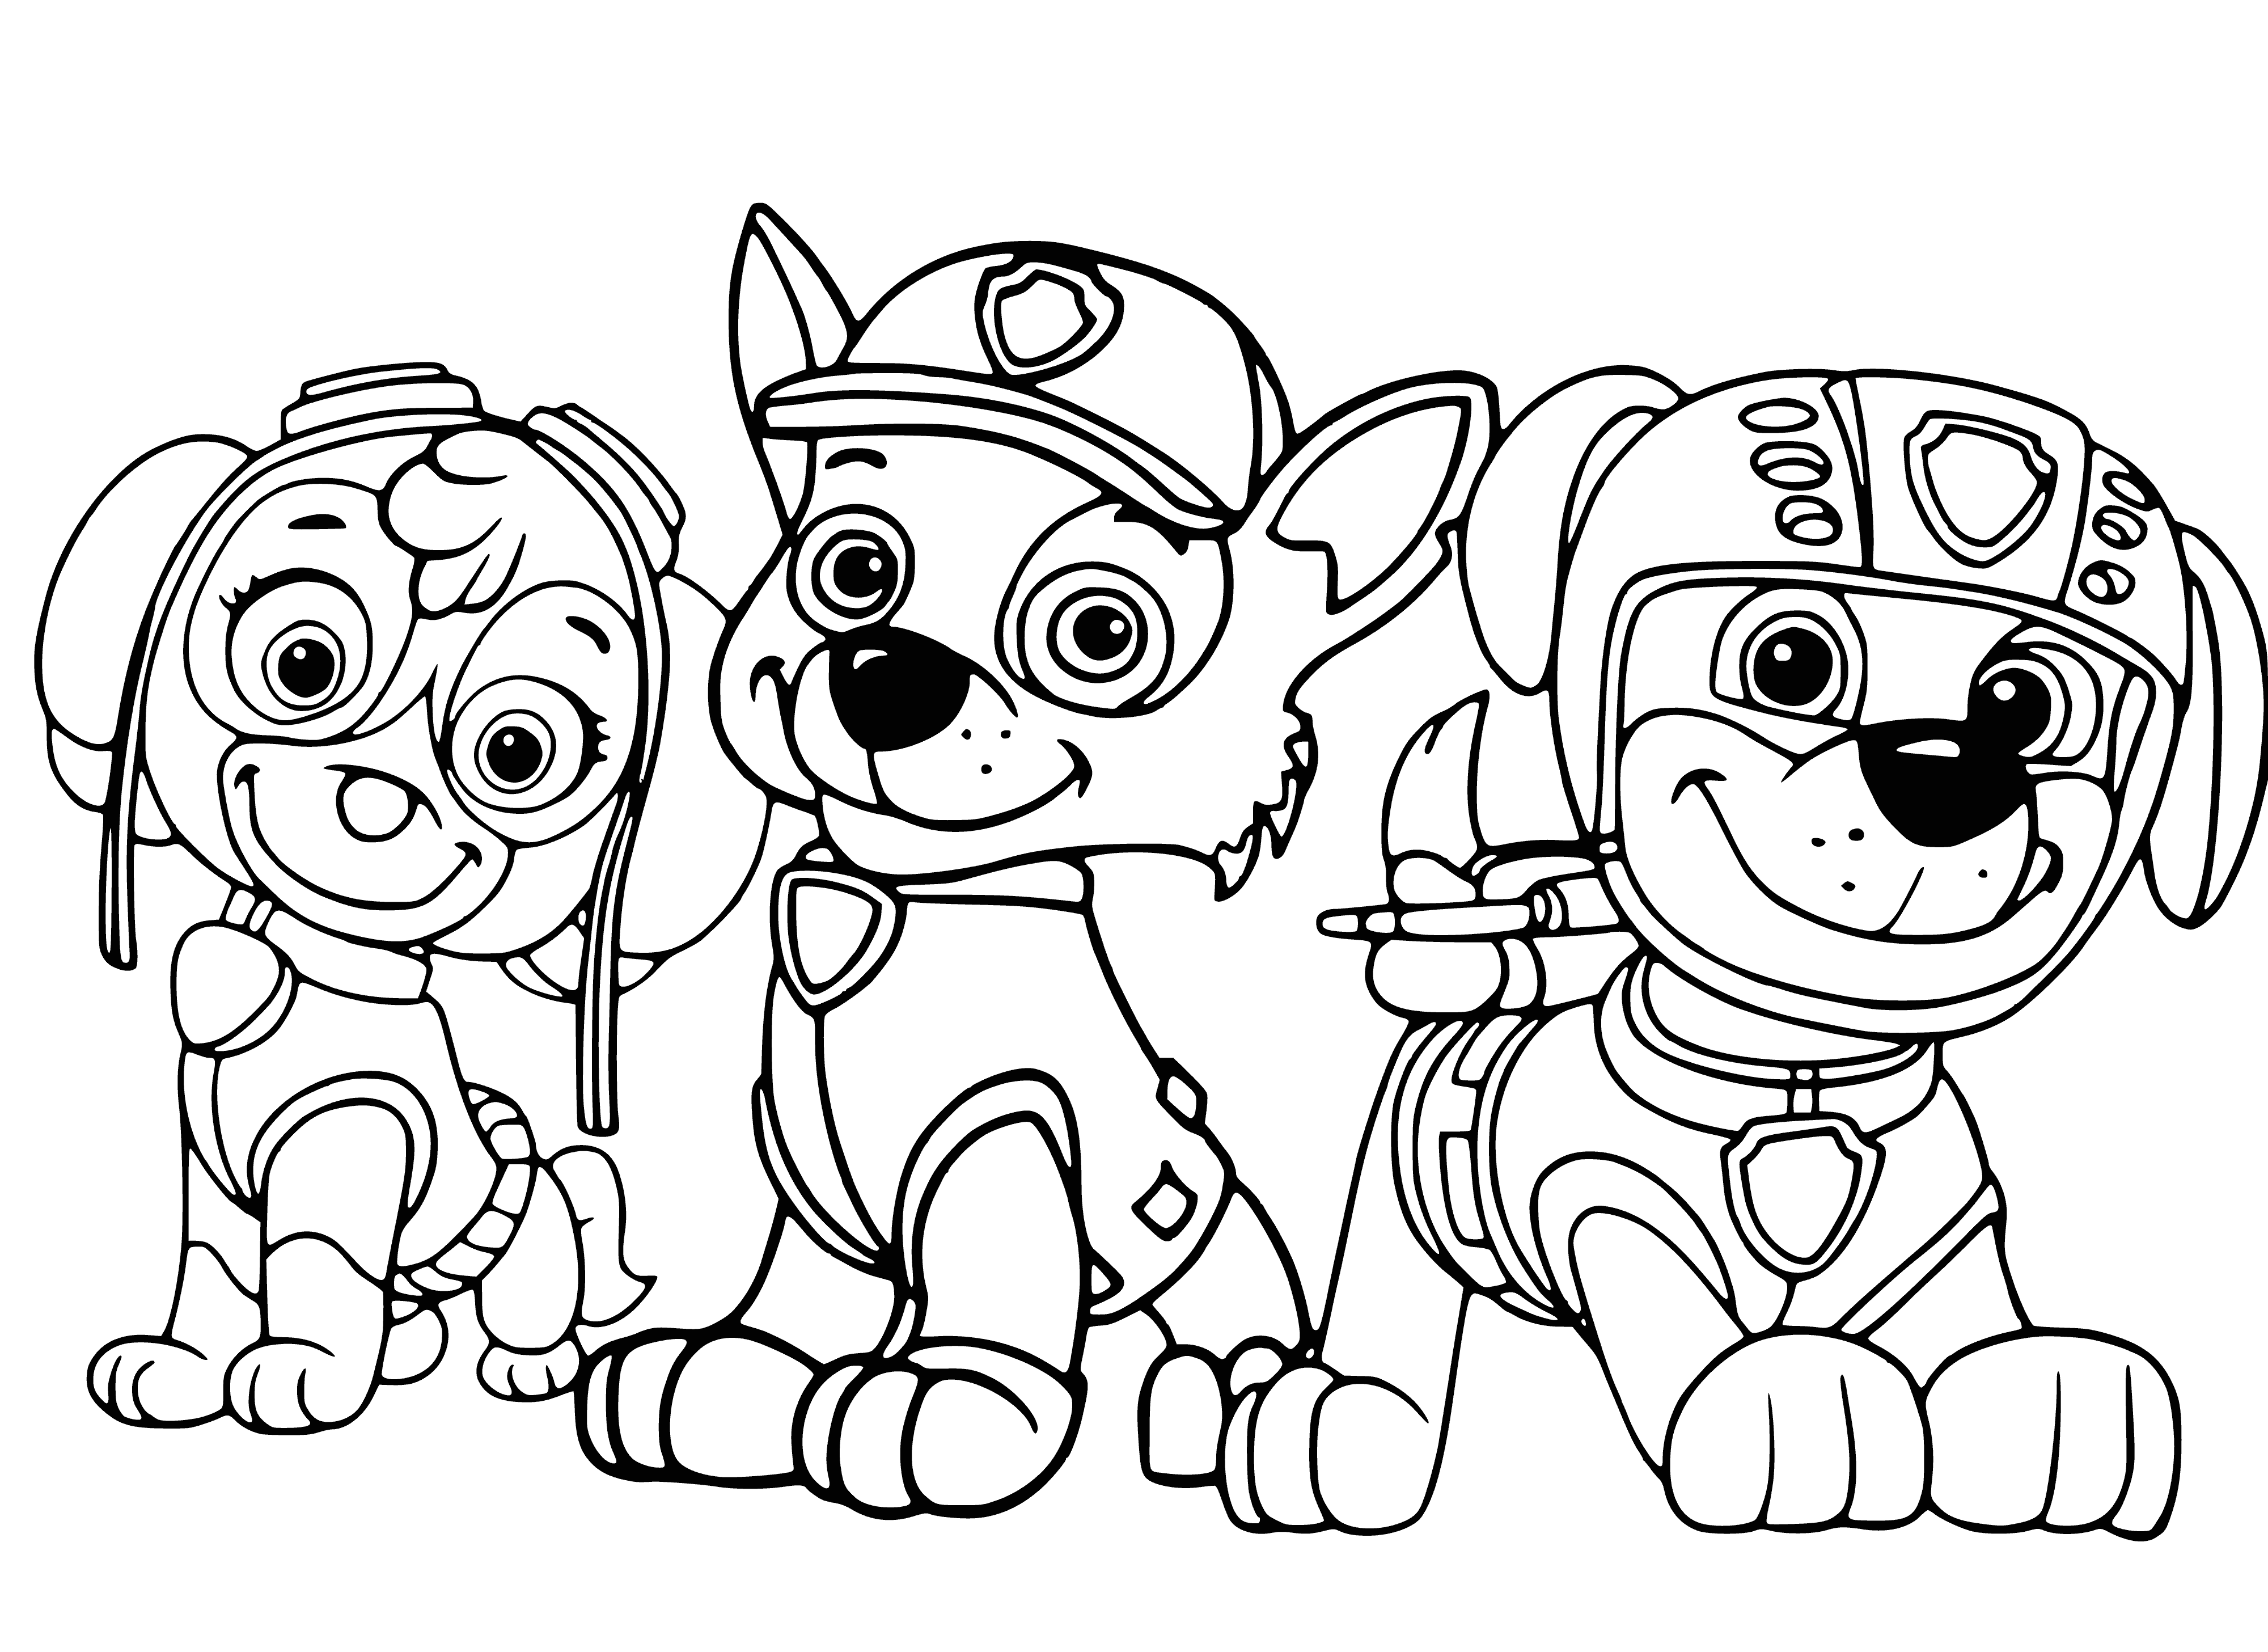 coloring page: PAW Patrol is a pack of 3 puppies who stick together & have endless adventures. No matter what, they have each other's backs & have fun!